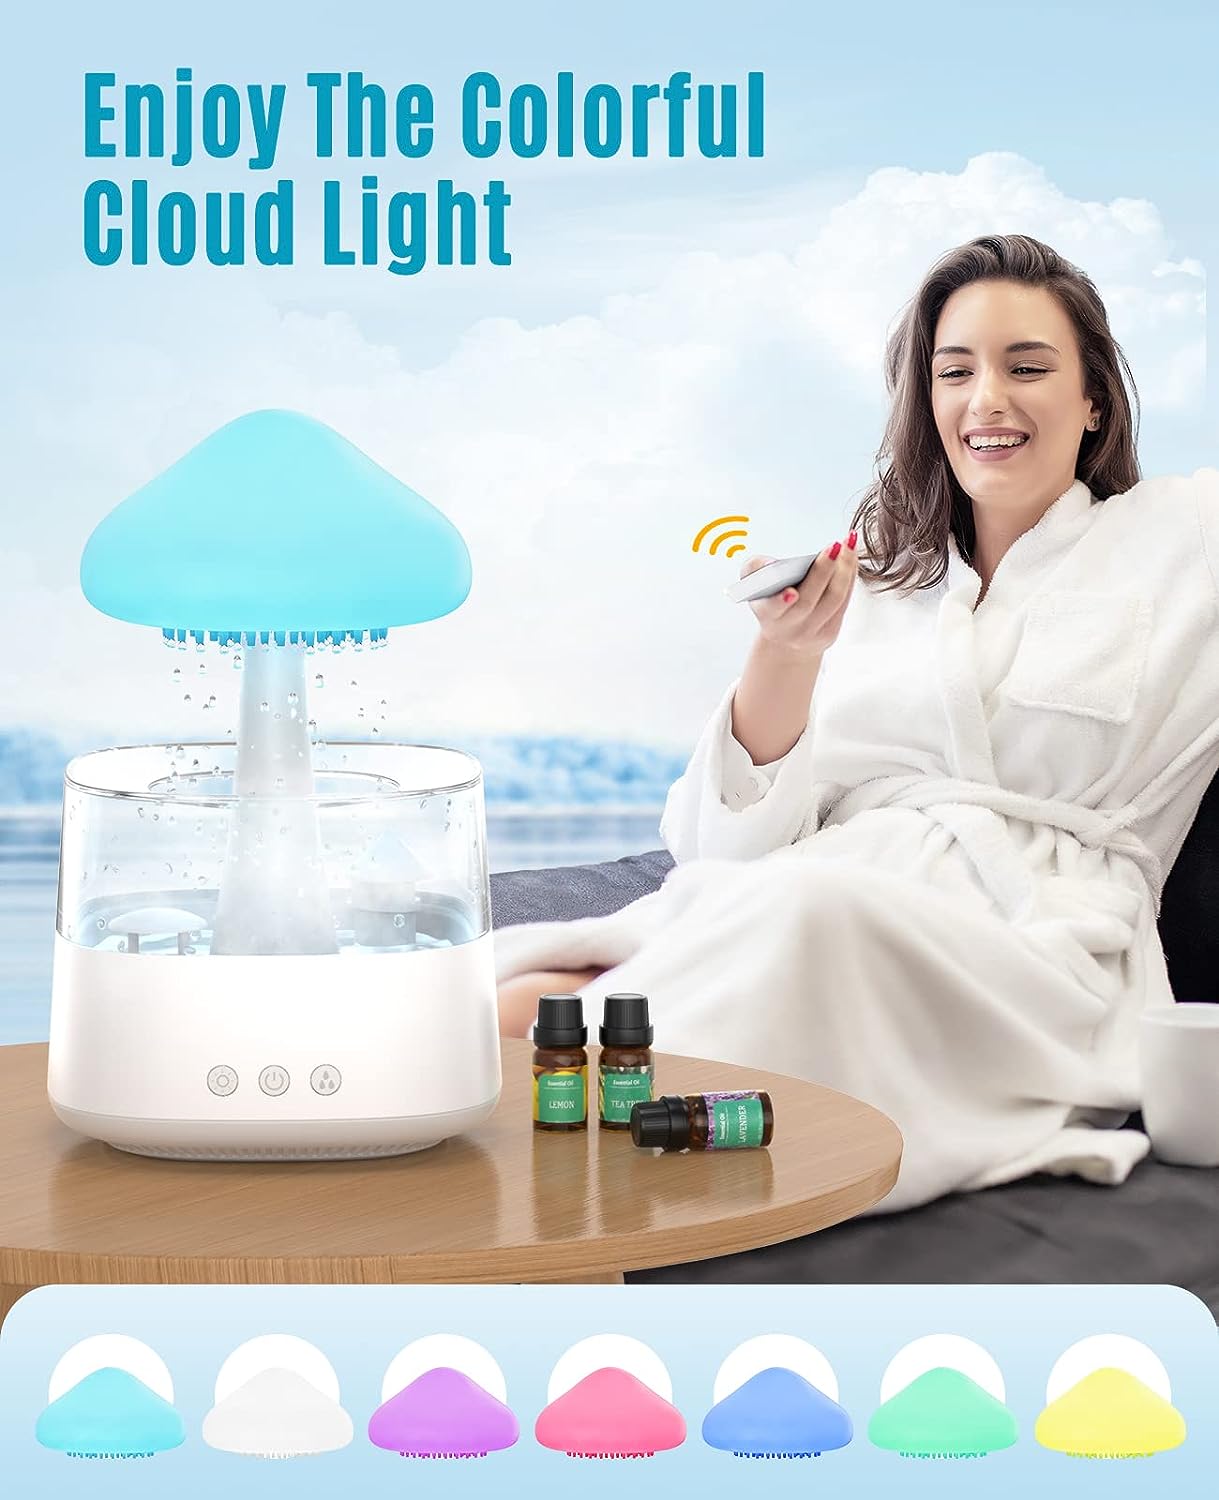 Rain Cloud Humidifier Water Drip, 2 in 1 Humidifier with Essential